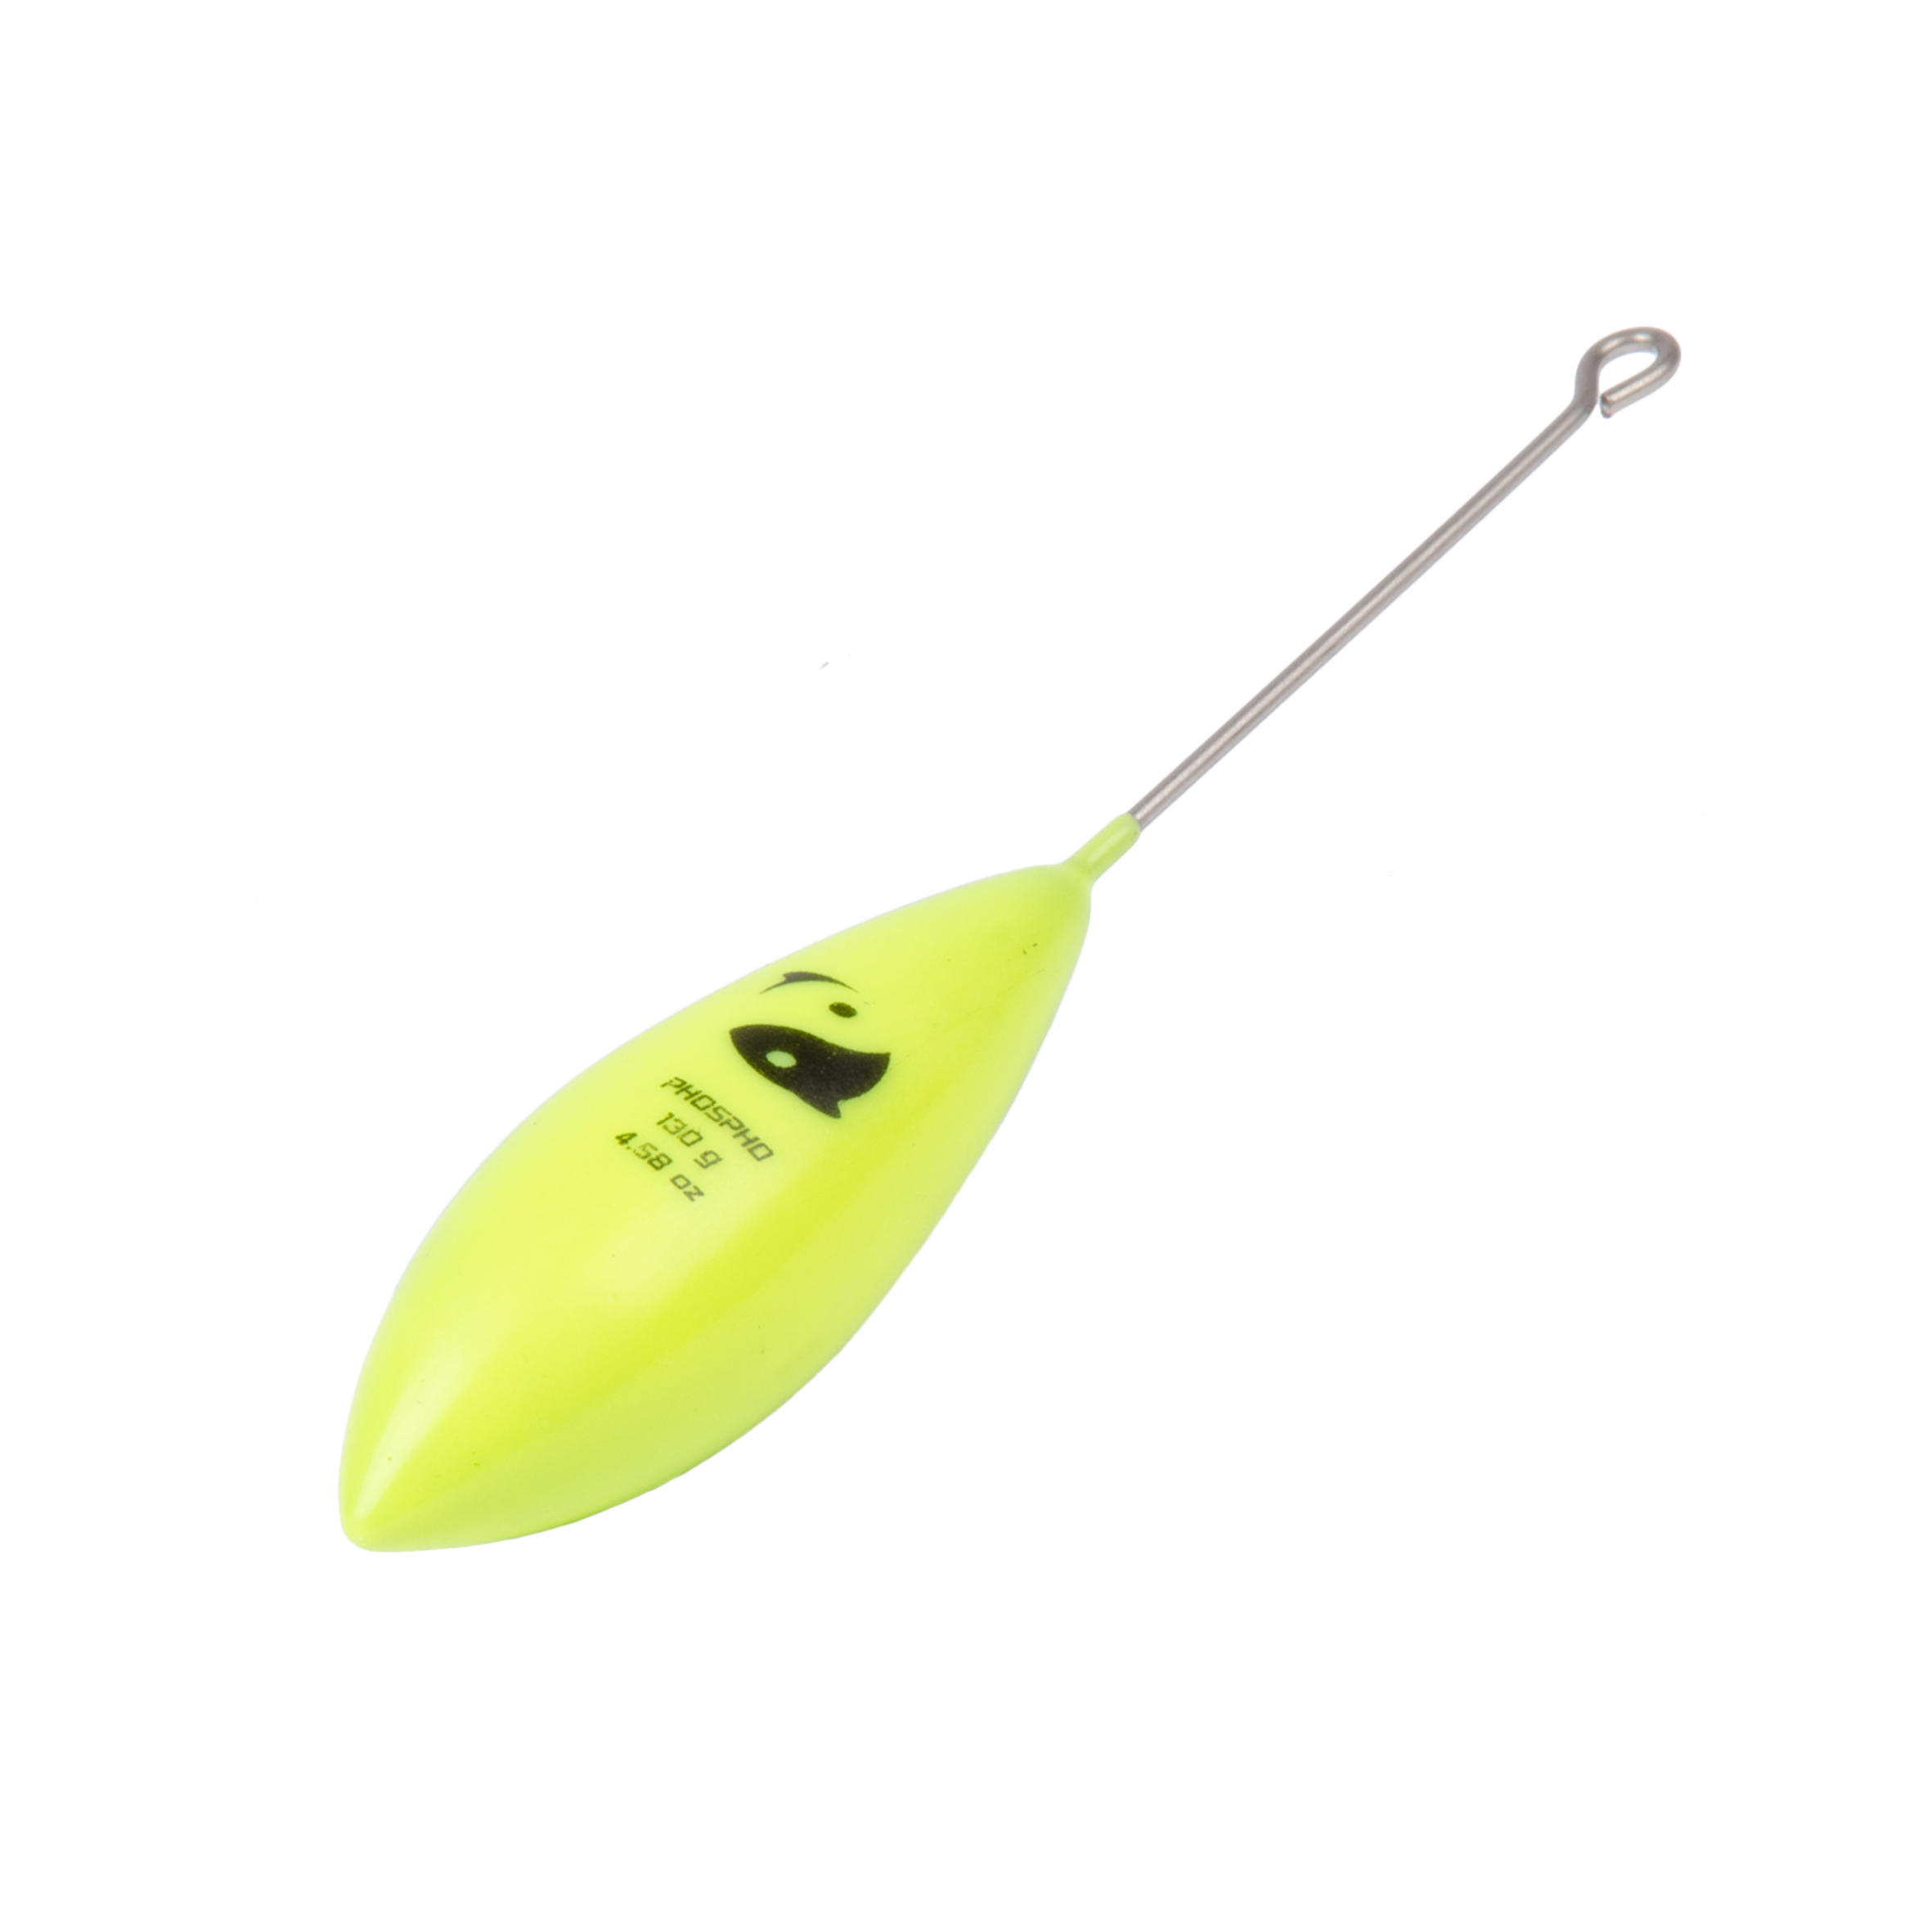 Fishing Surfcasting Bomb Sinker with Long Tail x2 - Phosphorescent Yellow 1/10